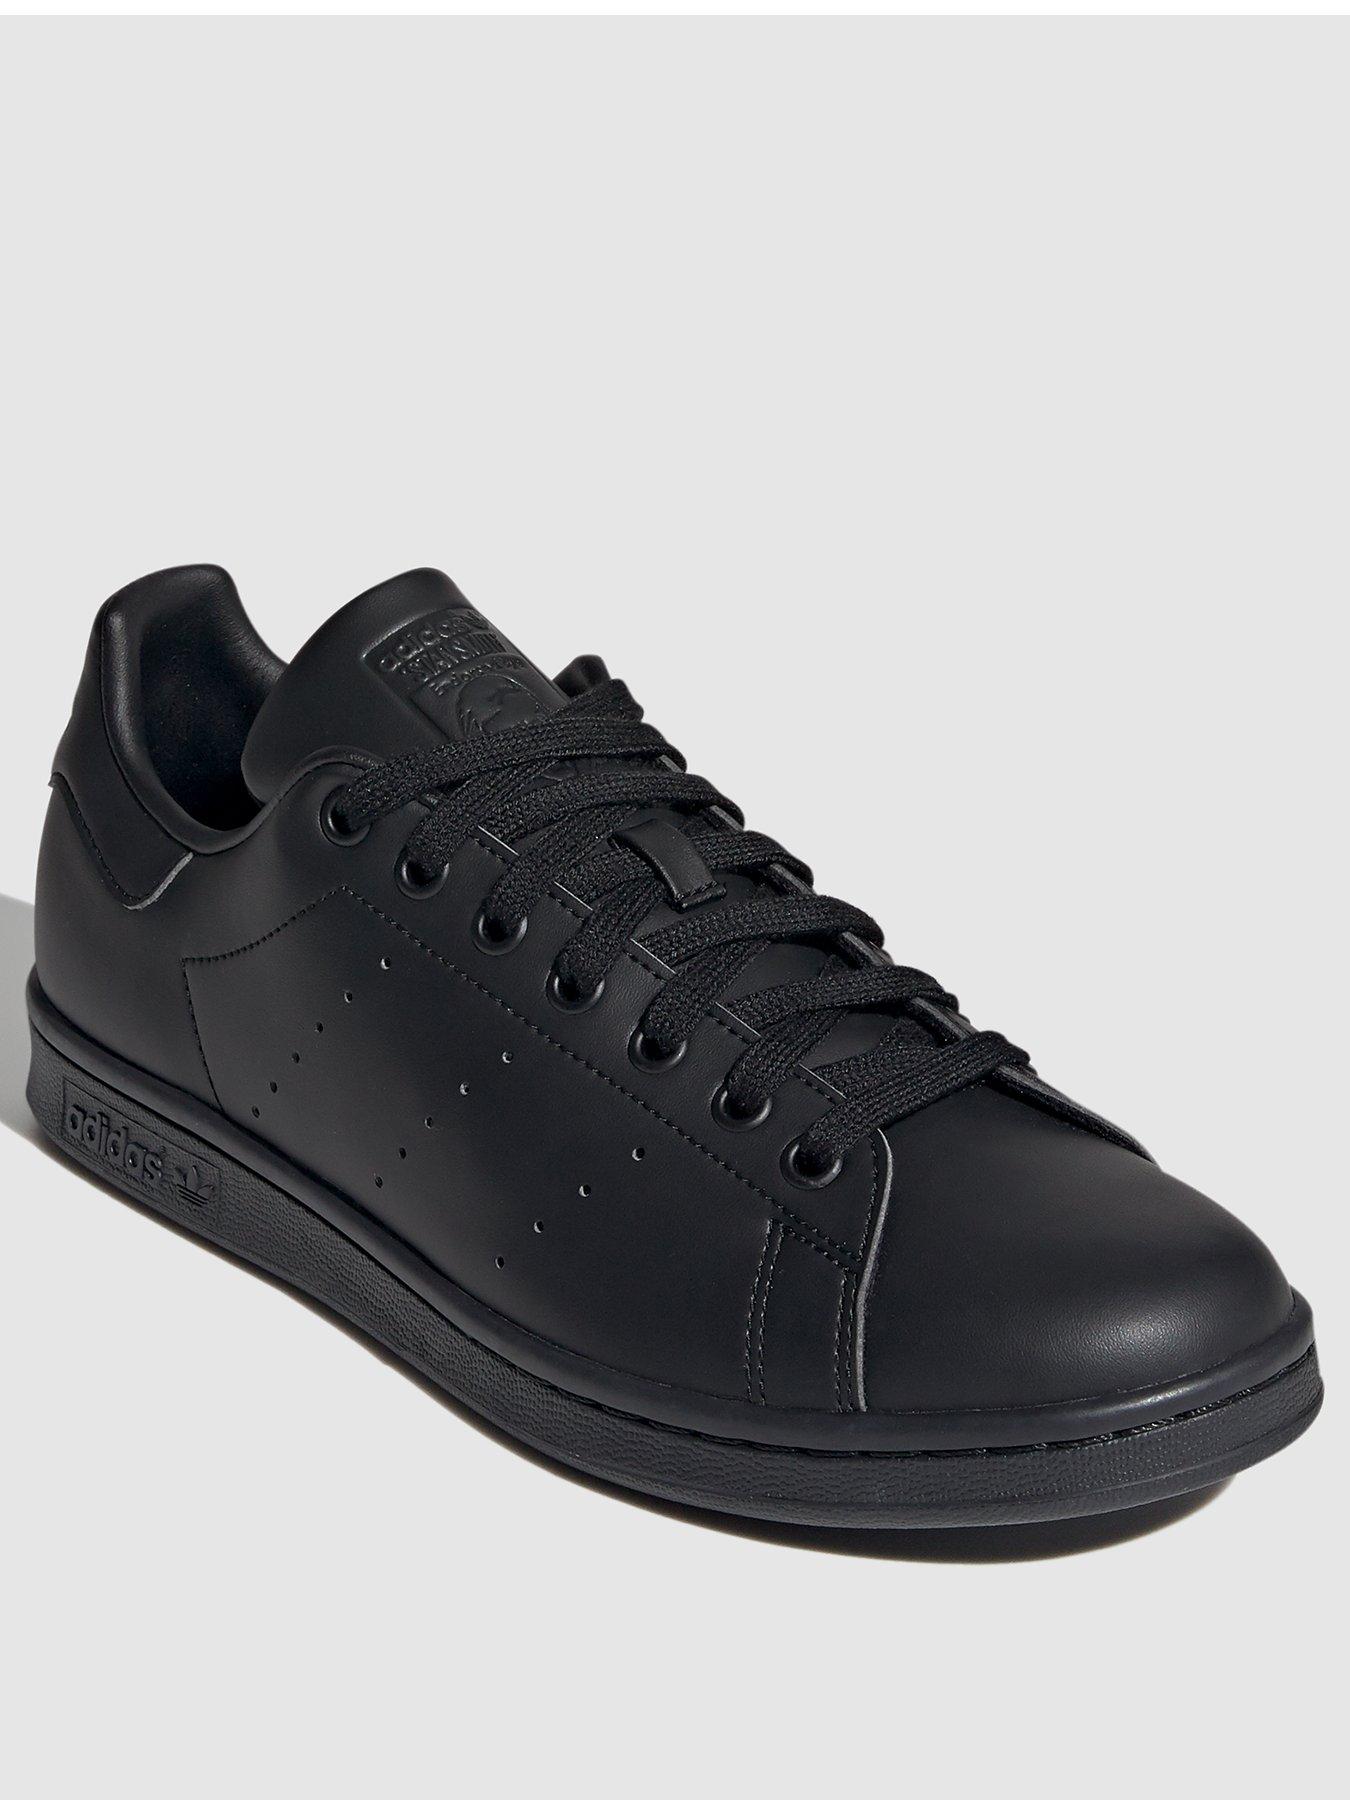 stan smith perforated trainer